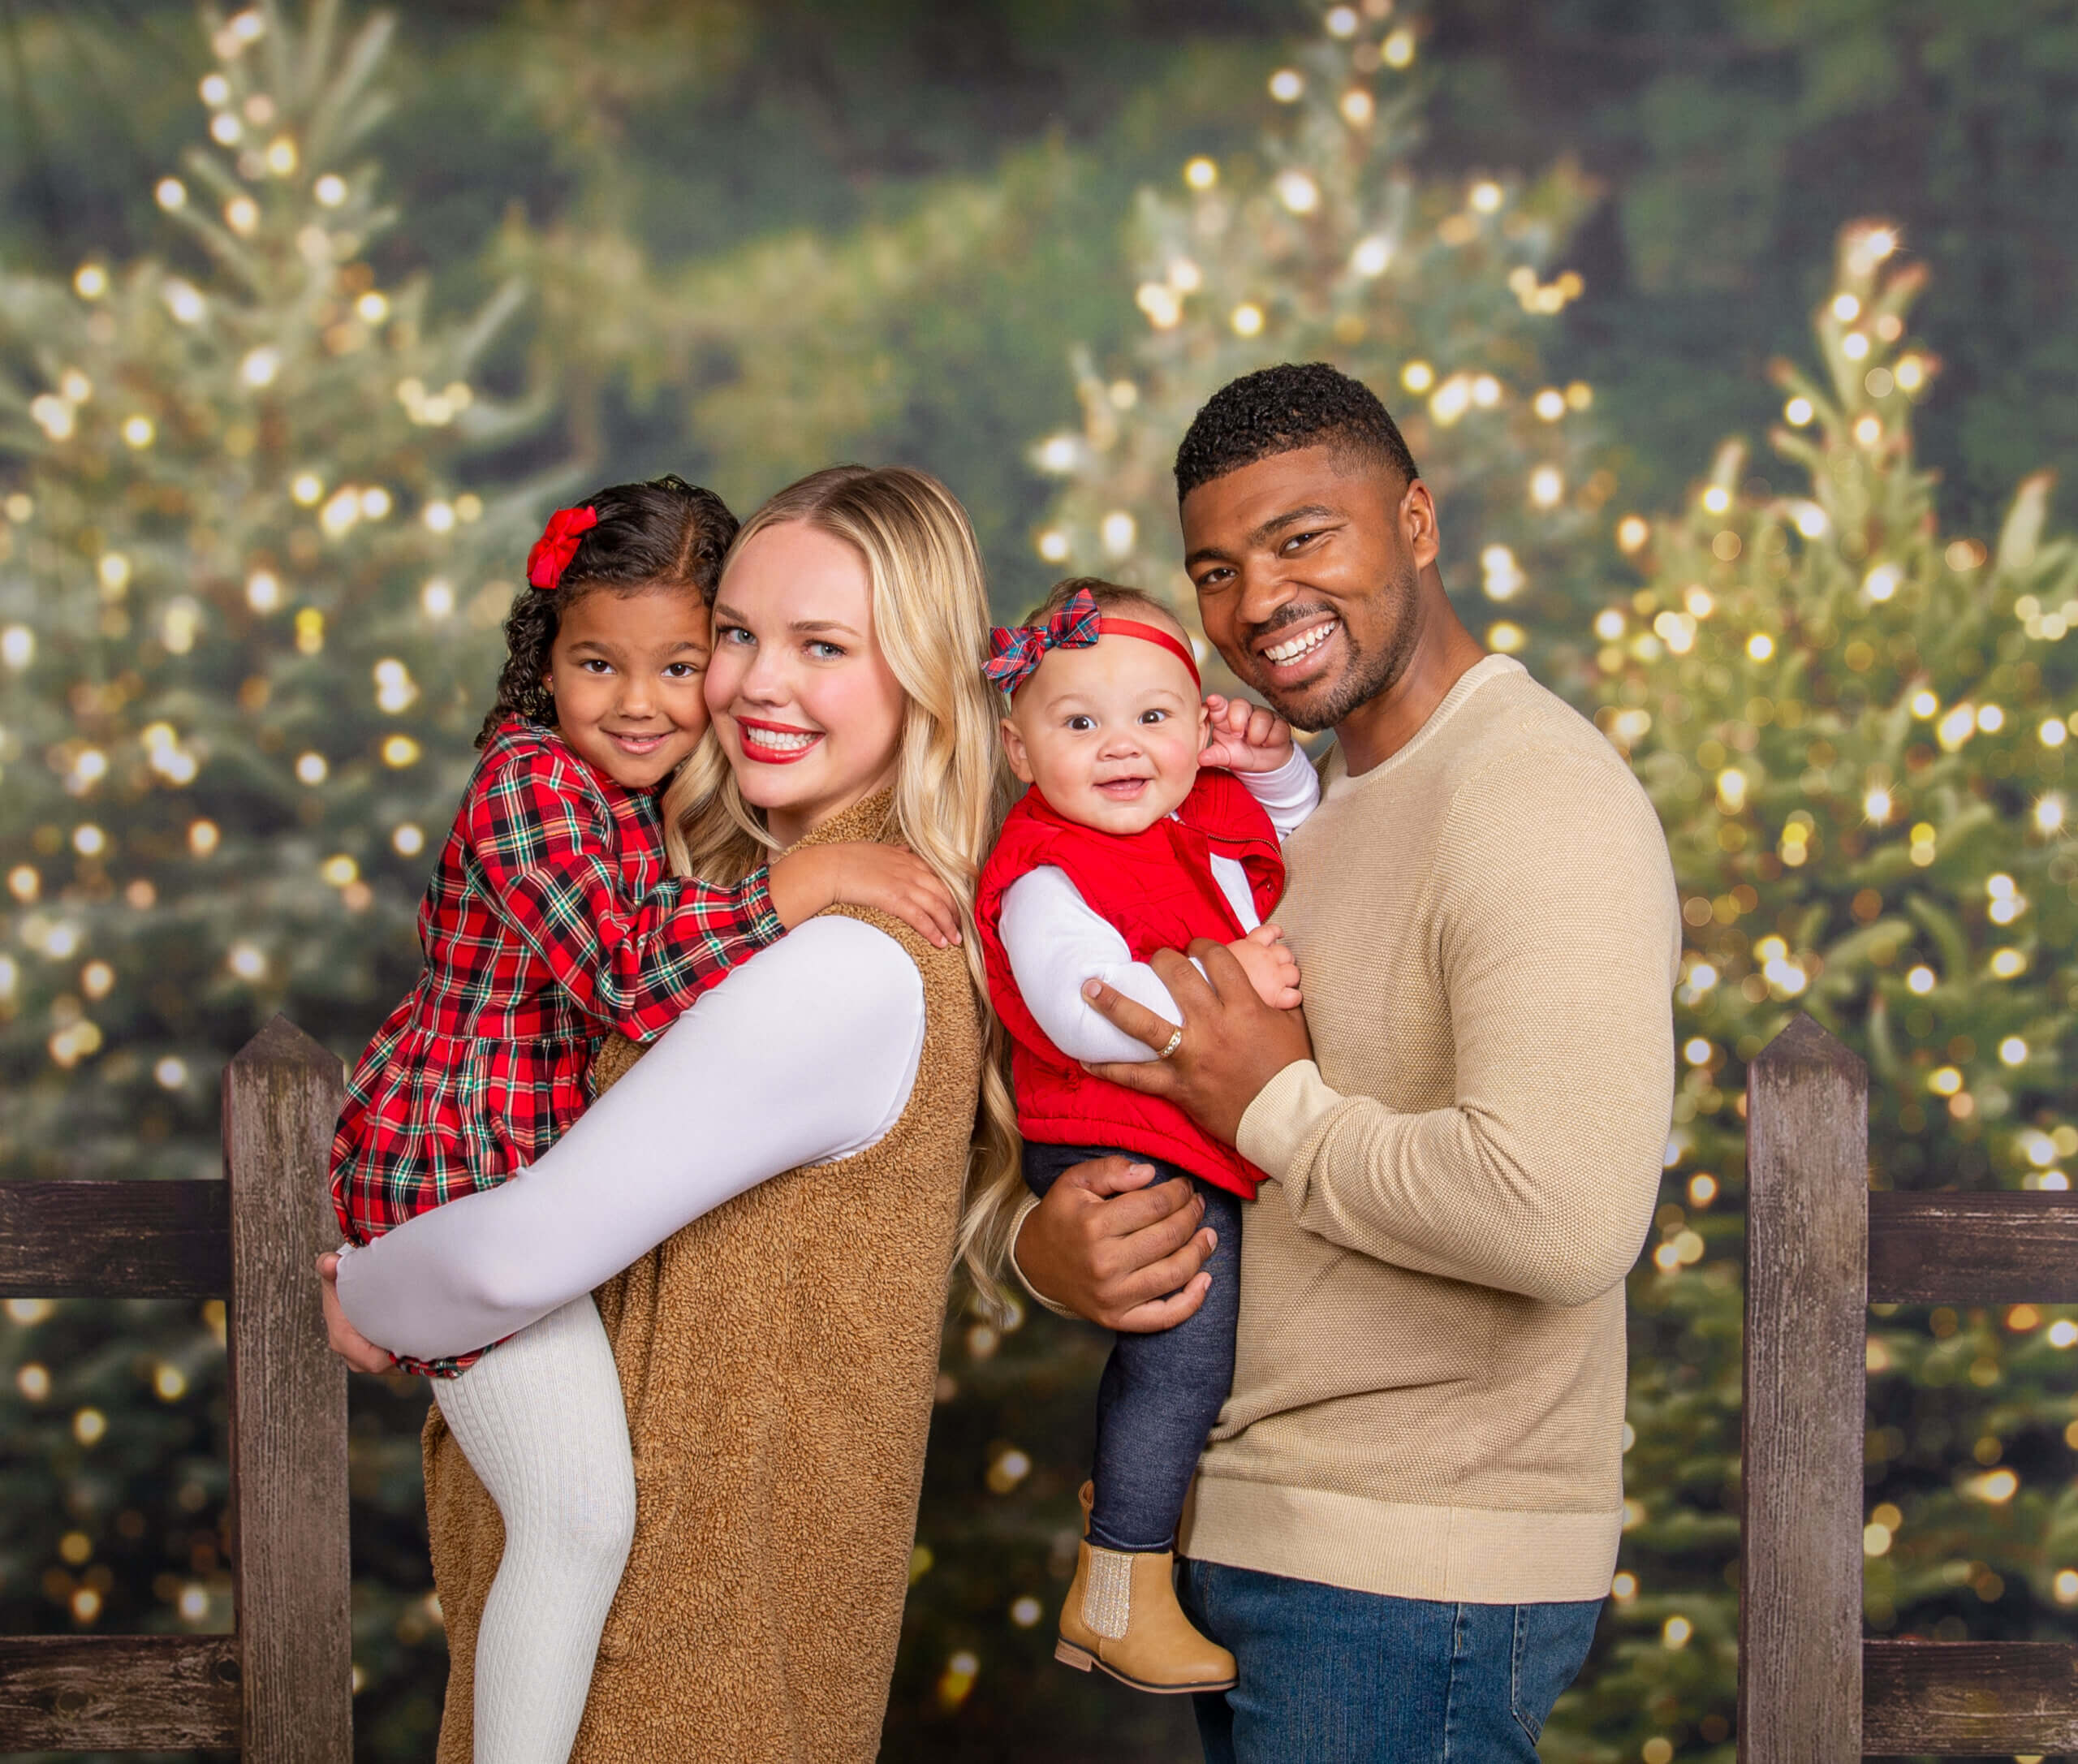 JCPenney Portraits - Professional Studio Photography